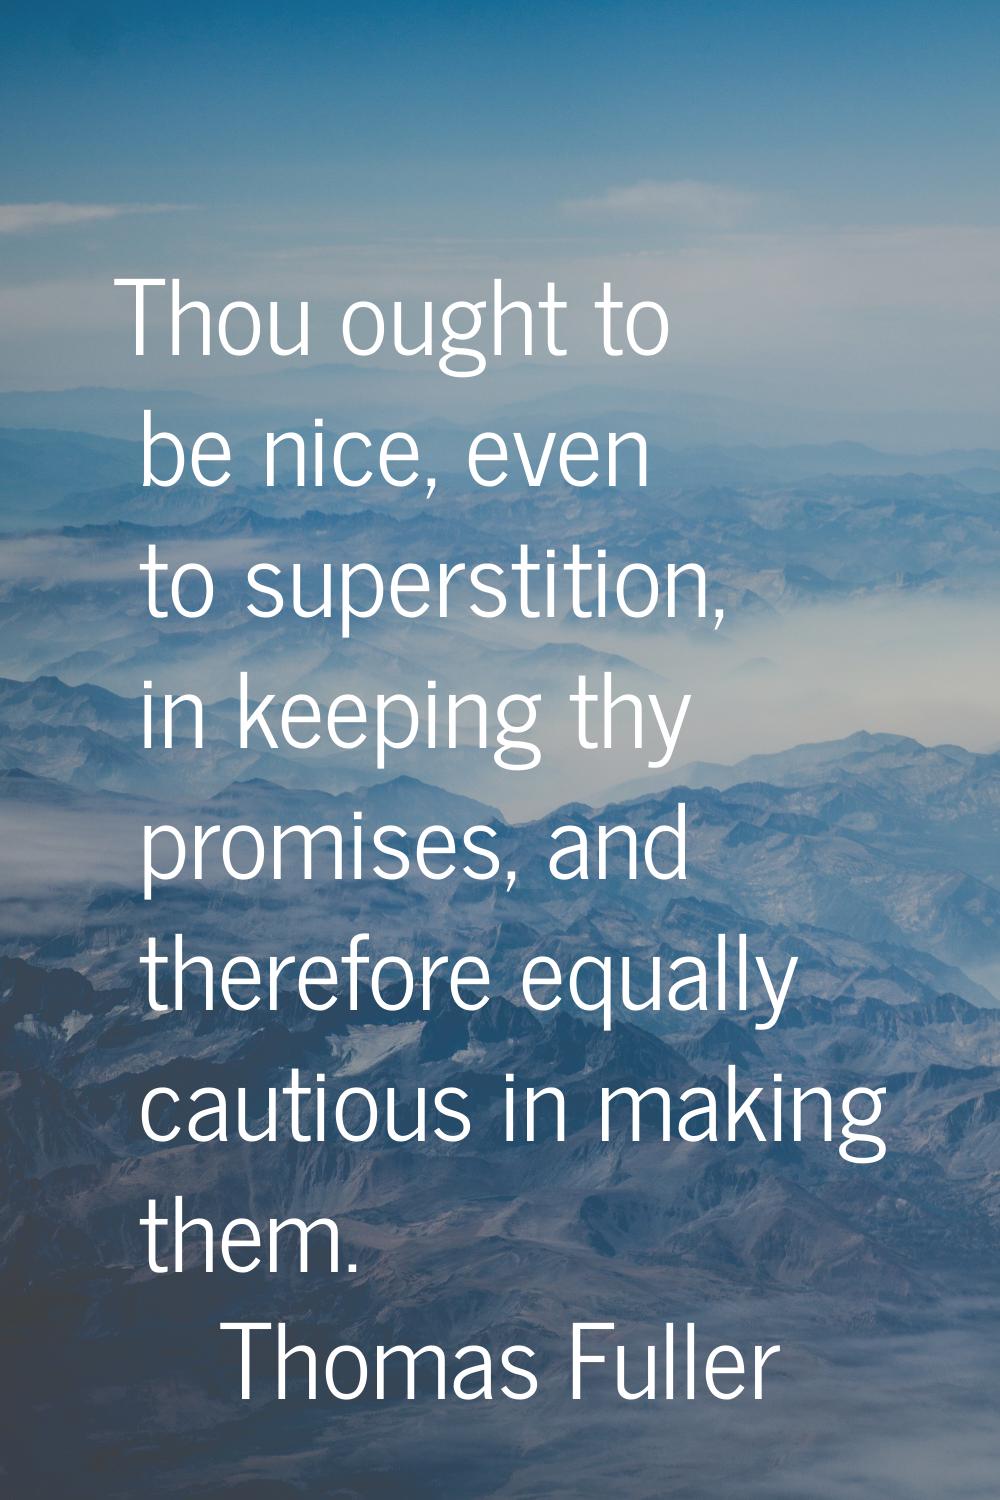 Thou ought to be nice, even to superstition, in keeping thy promises, and therefore equally cautiou